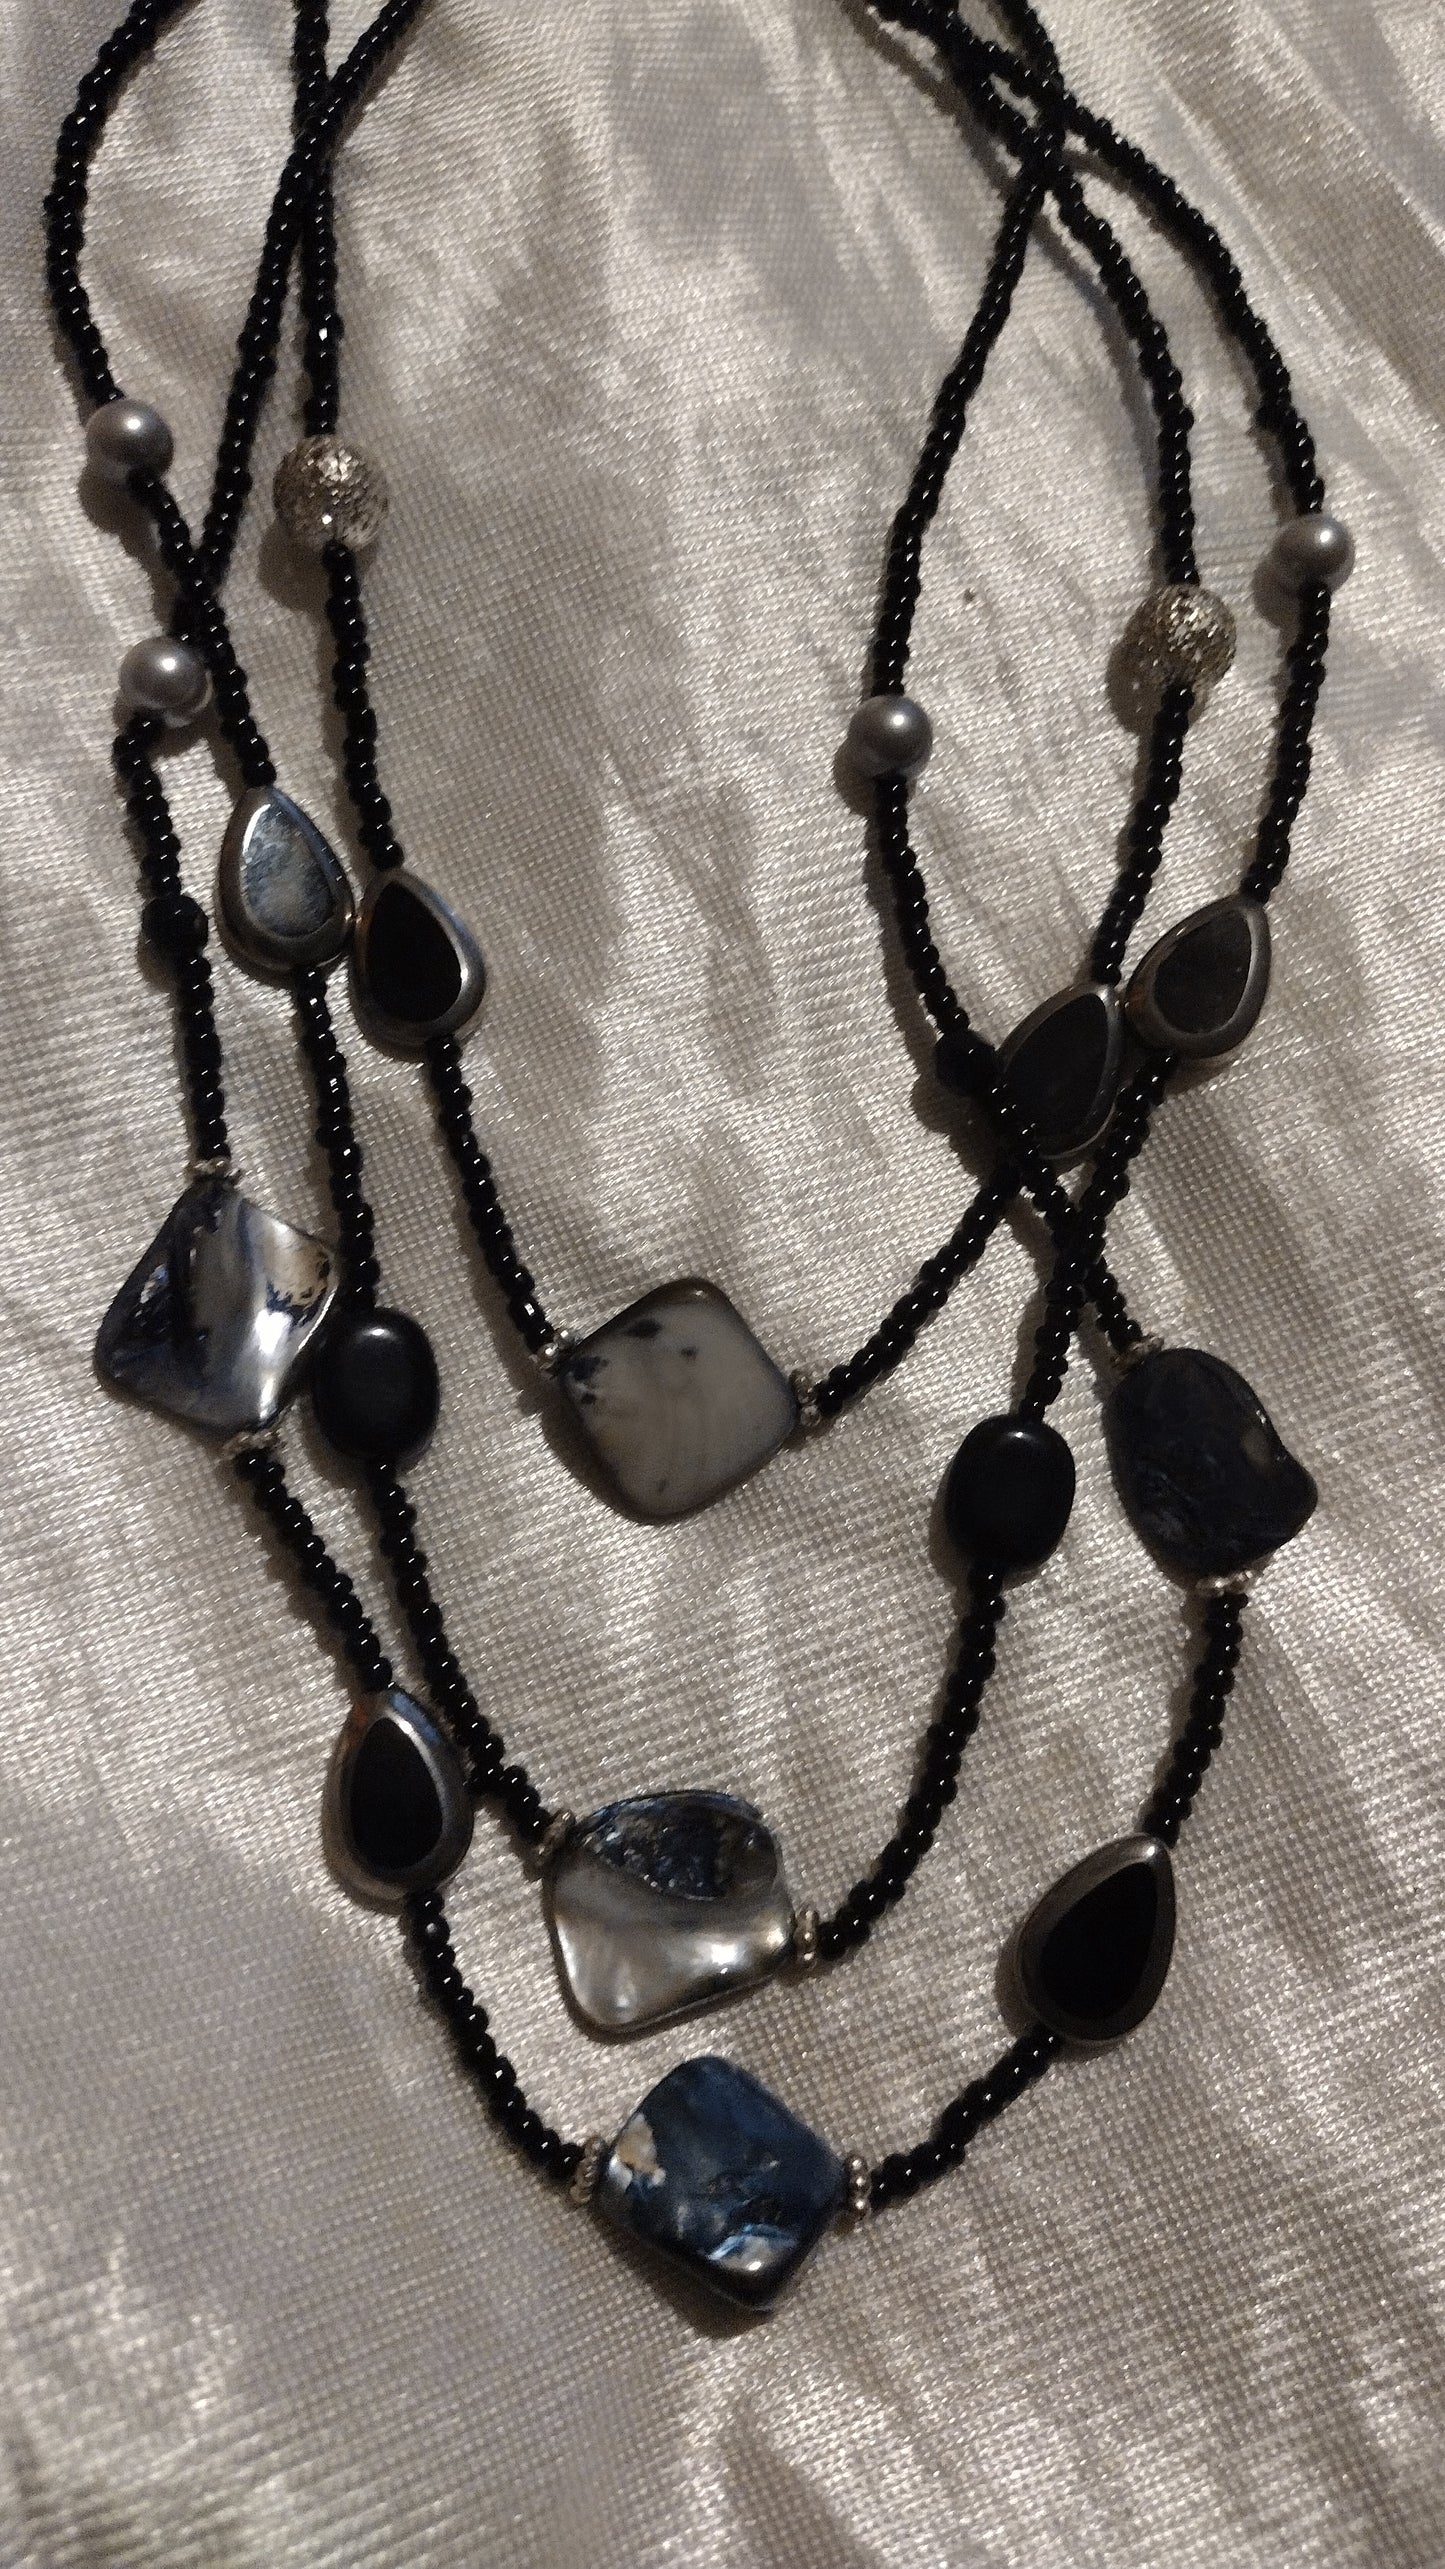 Women's 3-layered black necklace